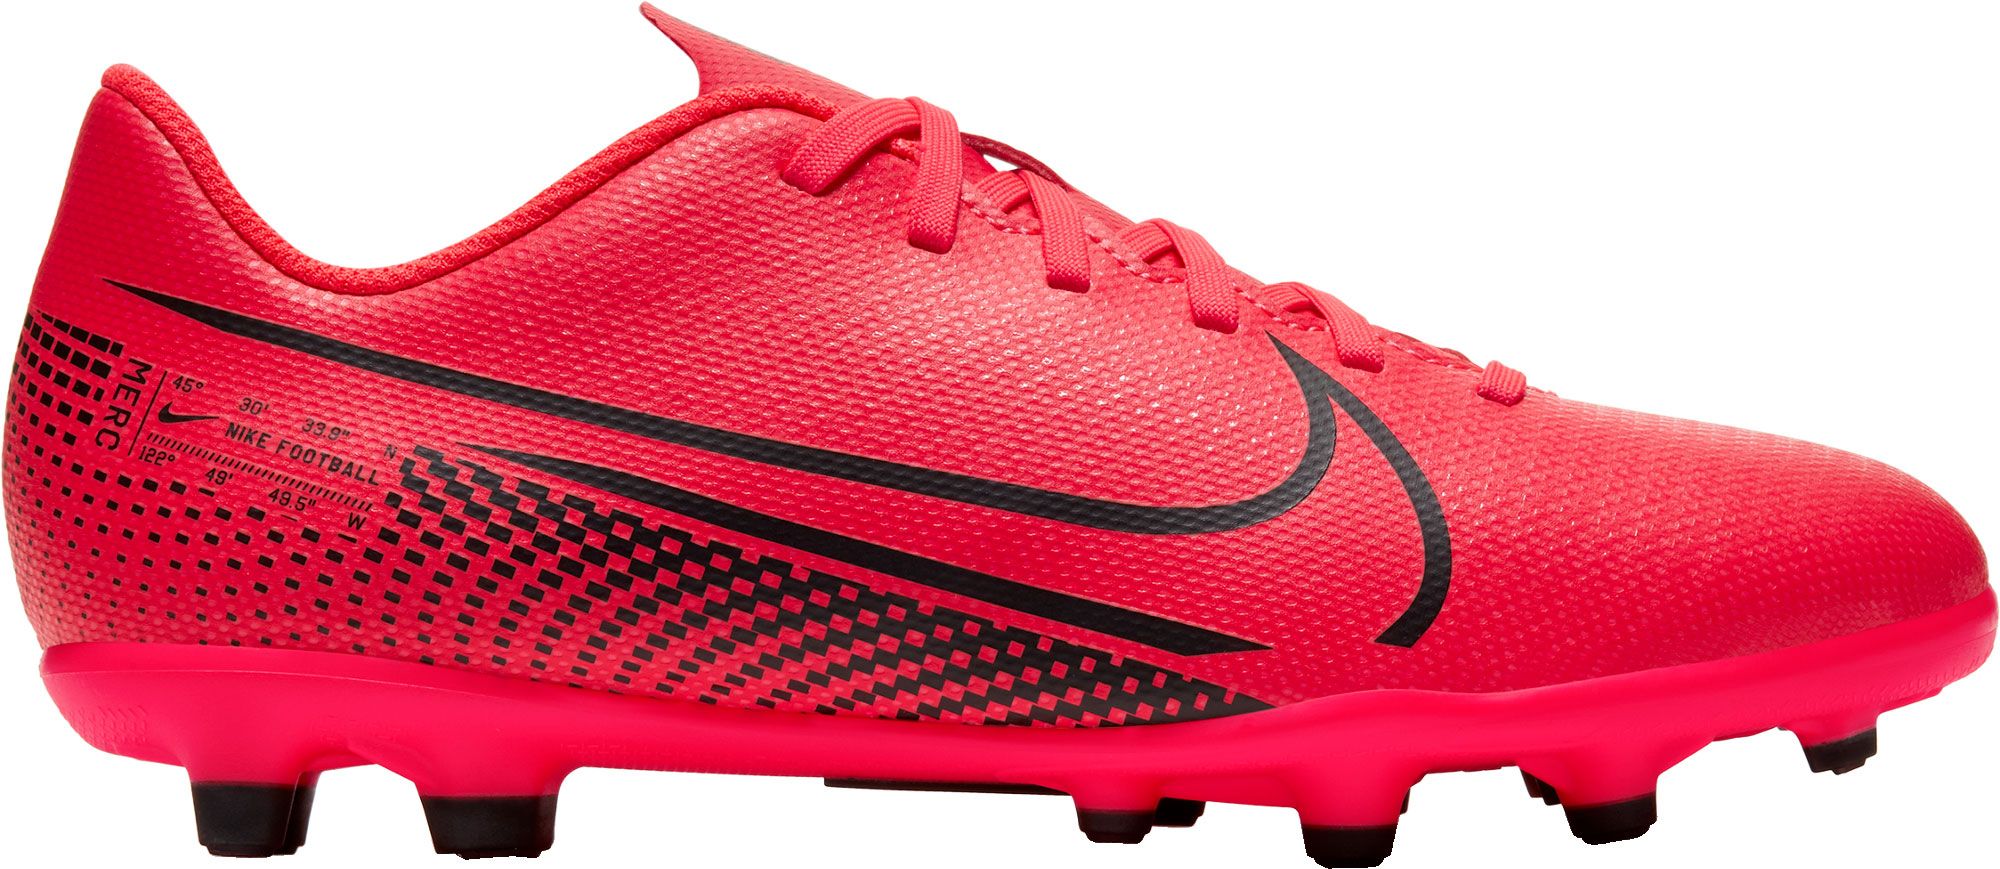 kids red soccer cleats